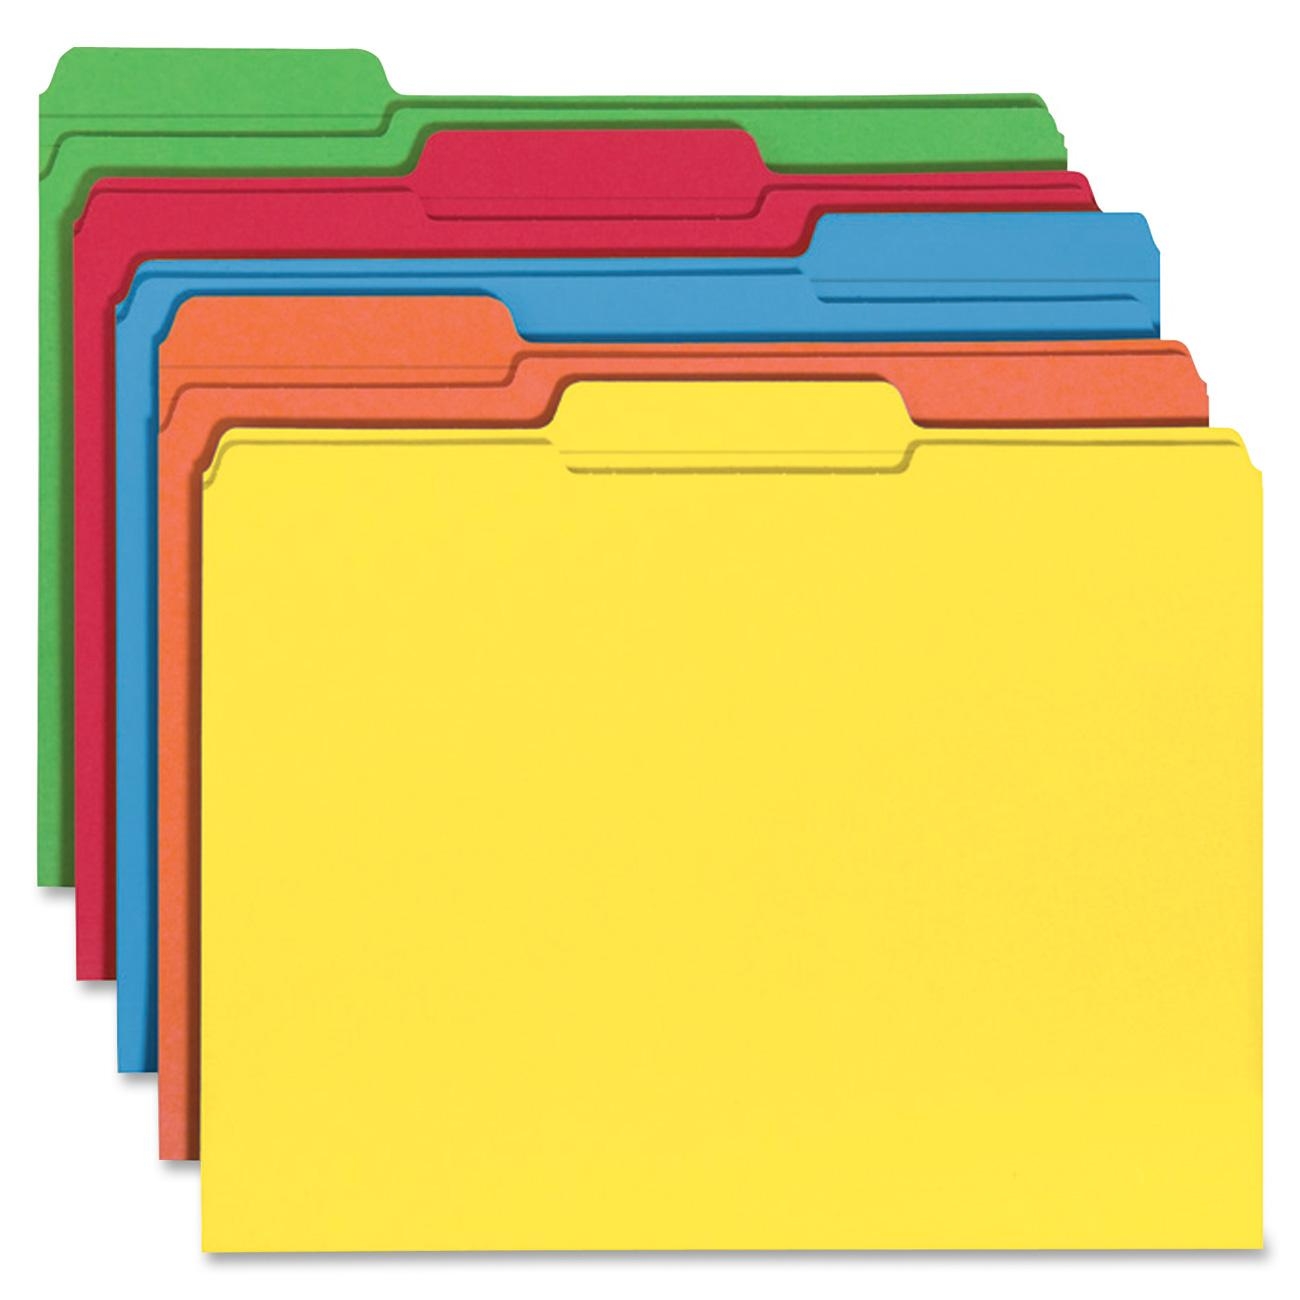 Organizing Your Home Records. Organizing Your Home Records. Pocket Folder Clipart ...